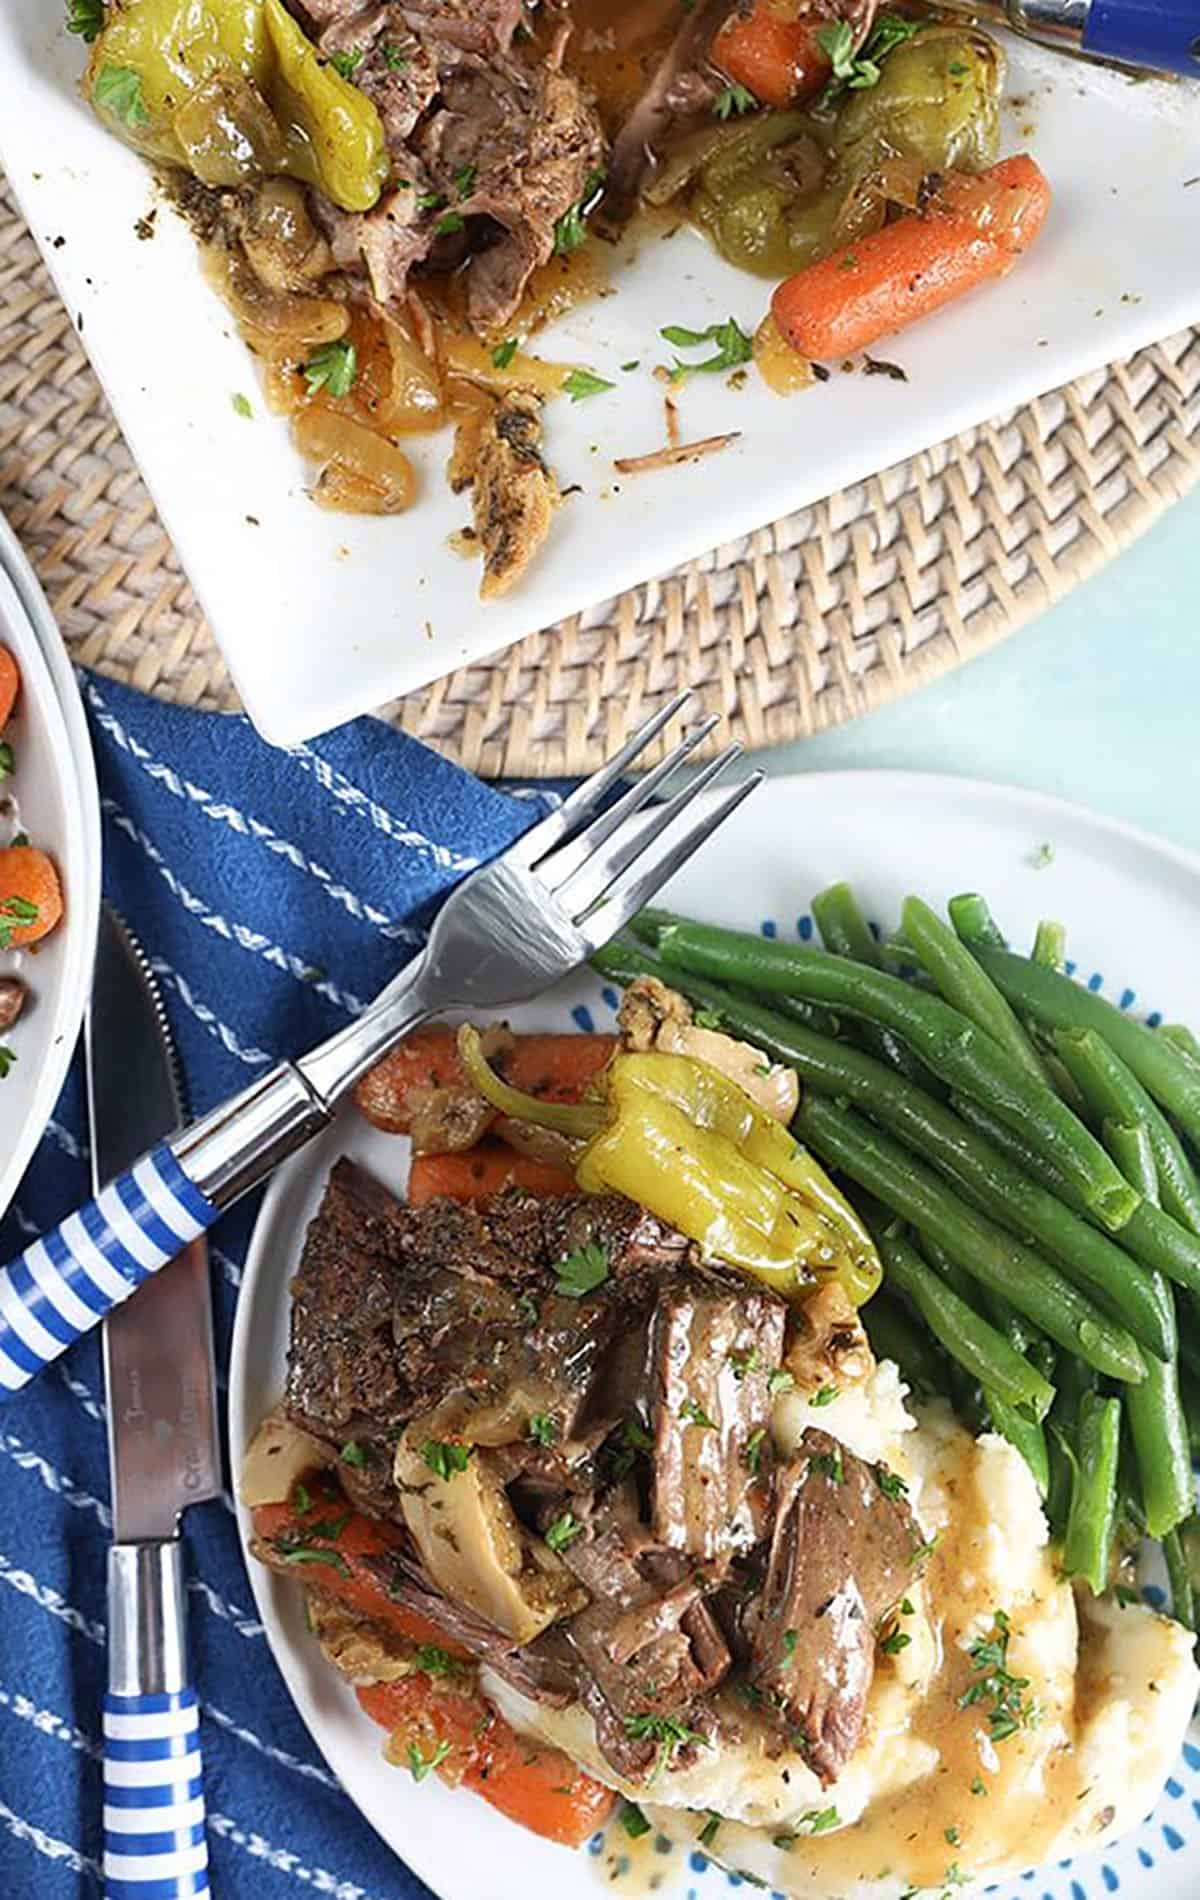 Mississippi Pot roast on mashed potatoes with a blue and white striped fork.